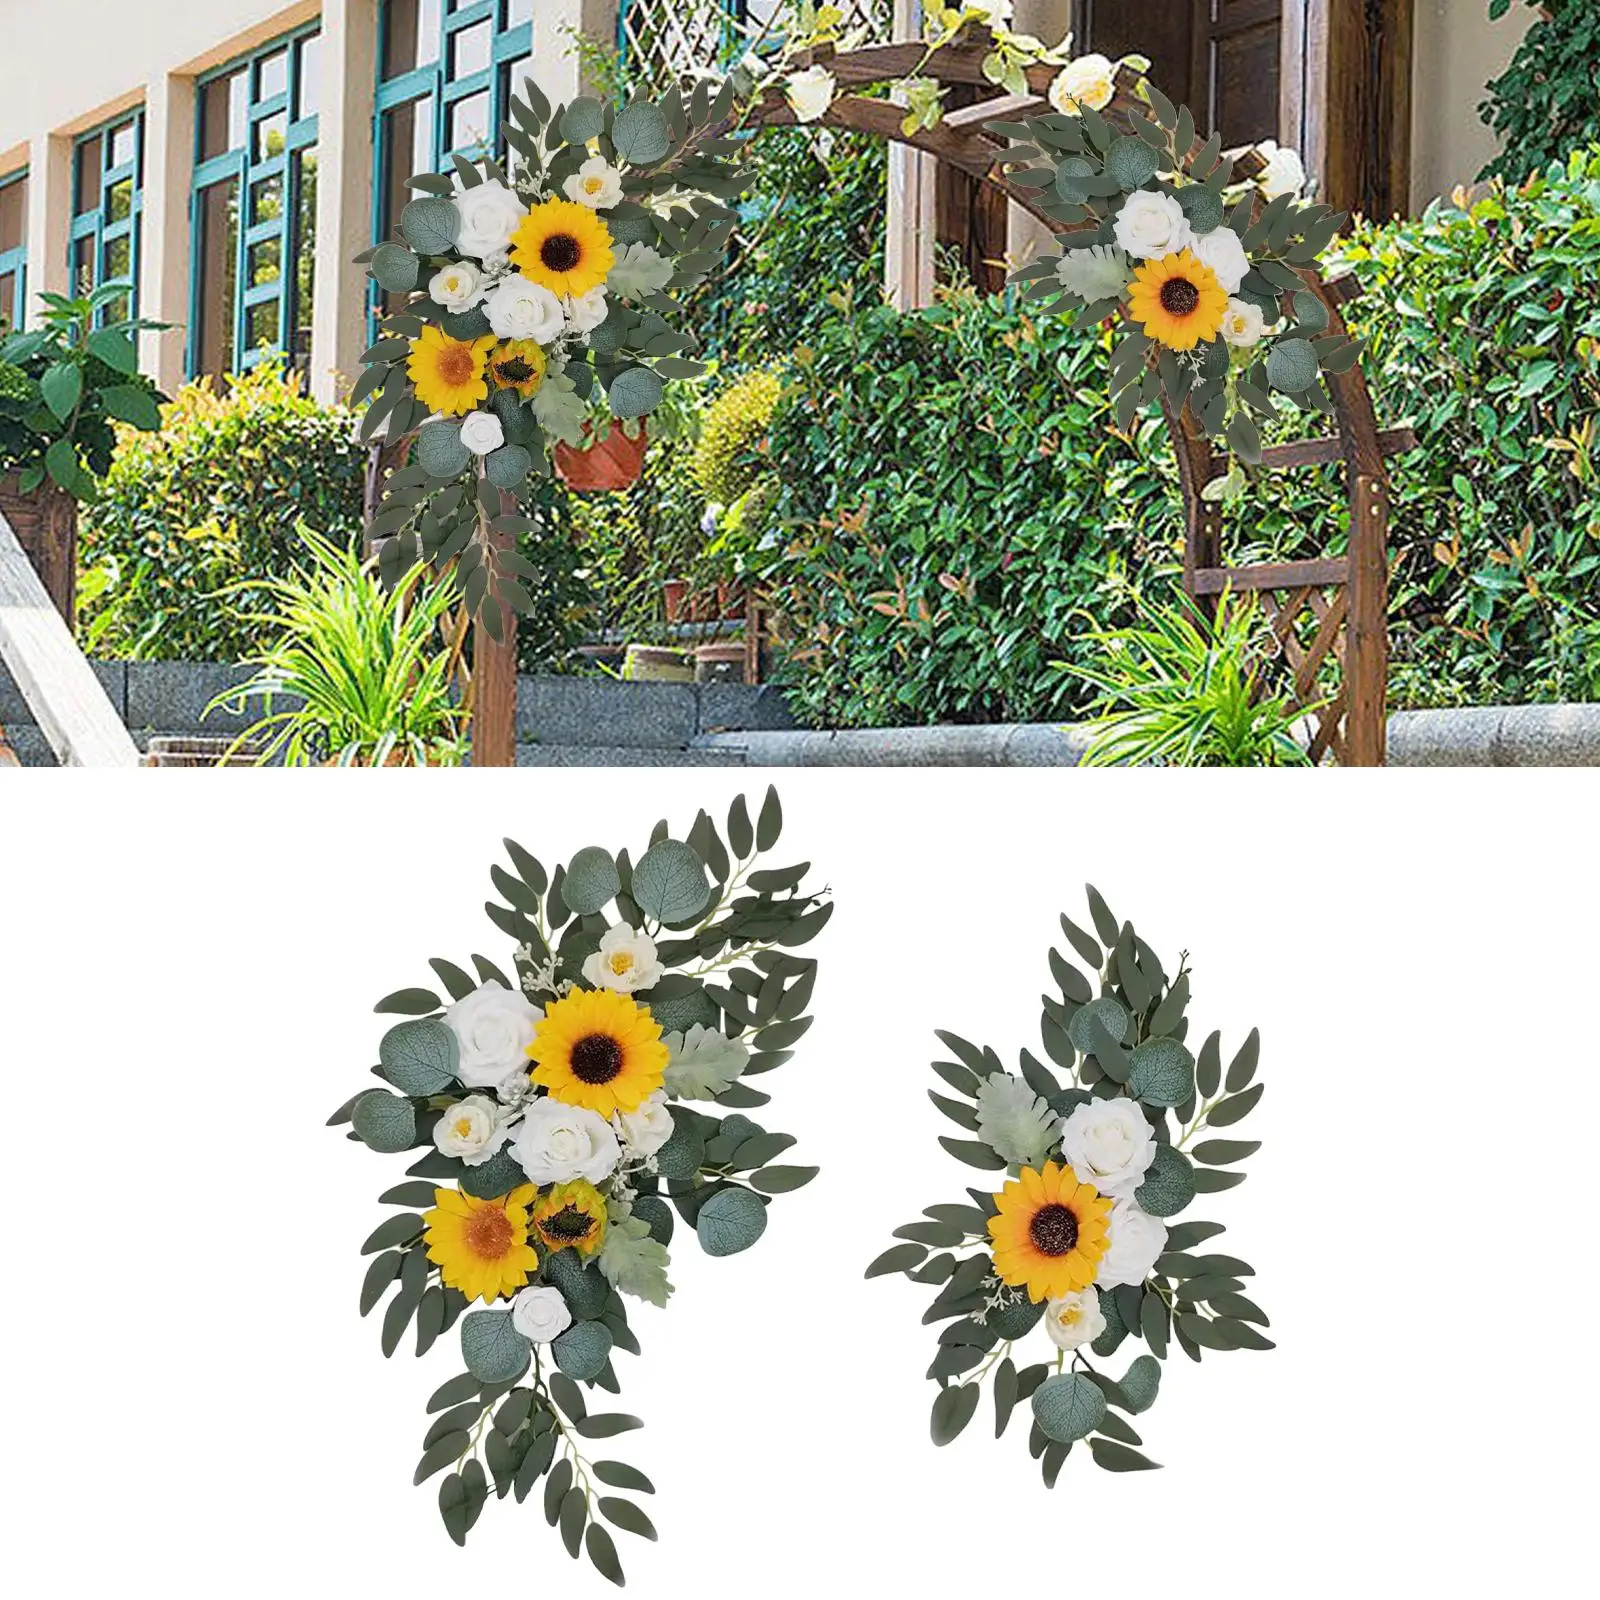 2 Pieces Artificial Flower Swag Sunflowers Decoration Rustic Display Fake Plant Flower Garland for Garden Door Ceremony Lintel